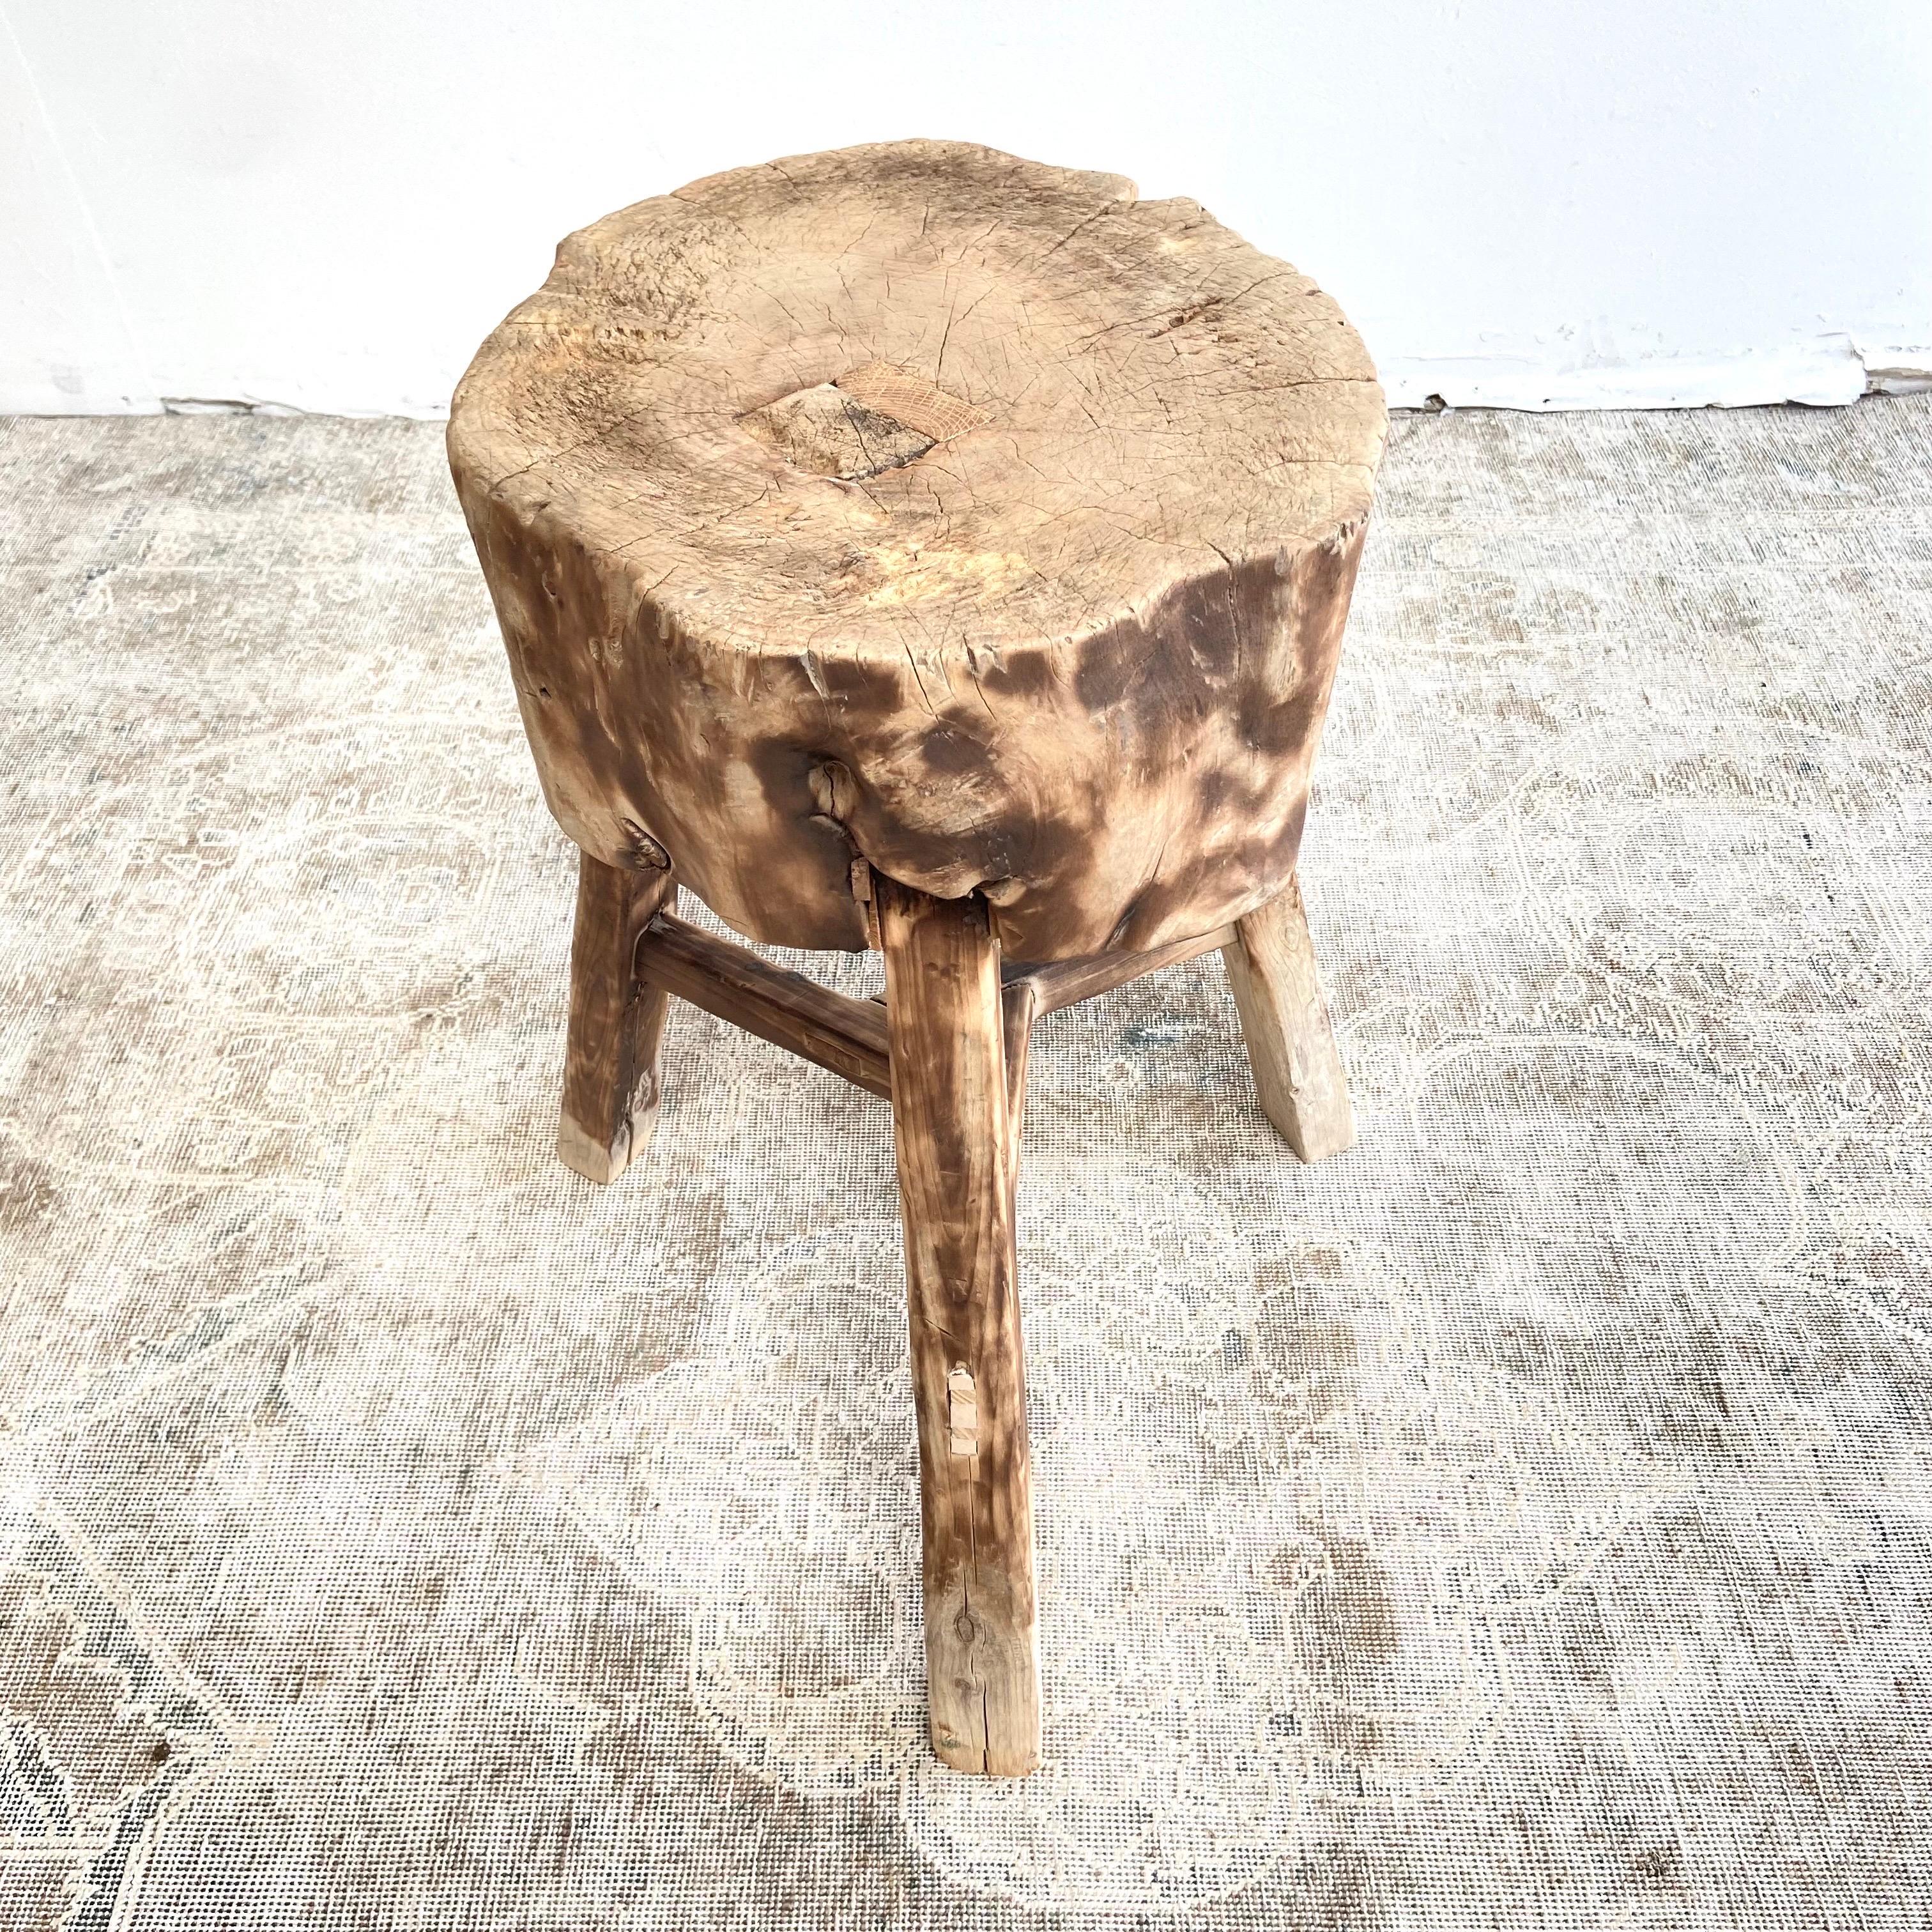 Chop block side table 
This solid stump slice was turned into a side table or stool. The solid thick top has a beautiful movement with unique characteristics. A natural live edge to show shape and form of what was. Solid and sturdy, perfect earthy